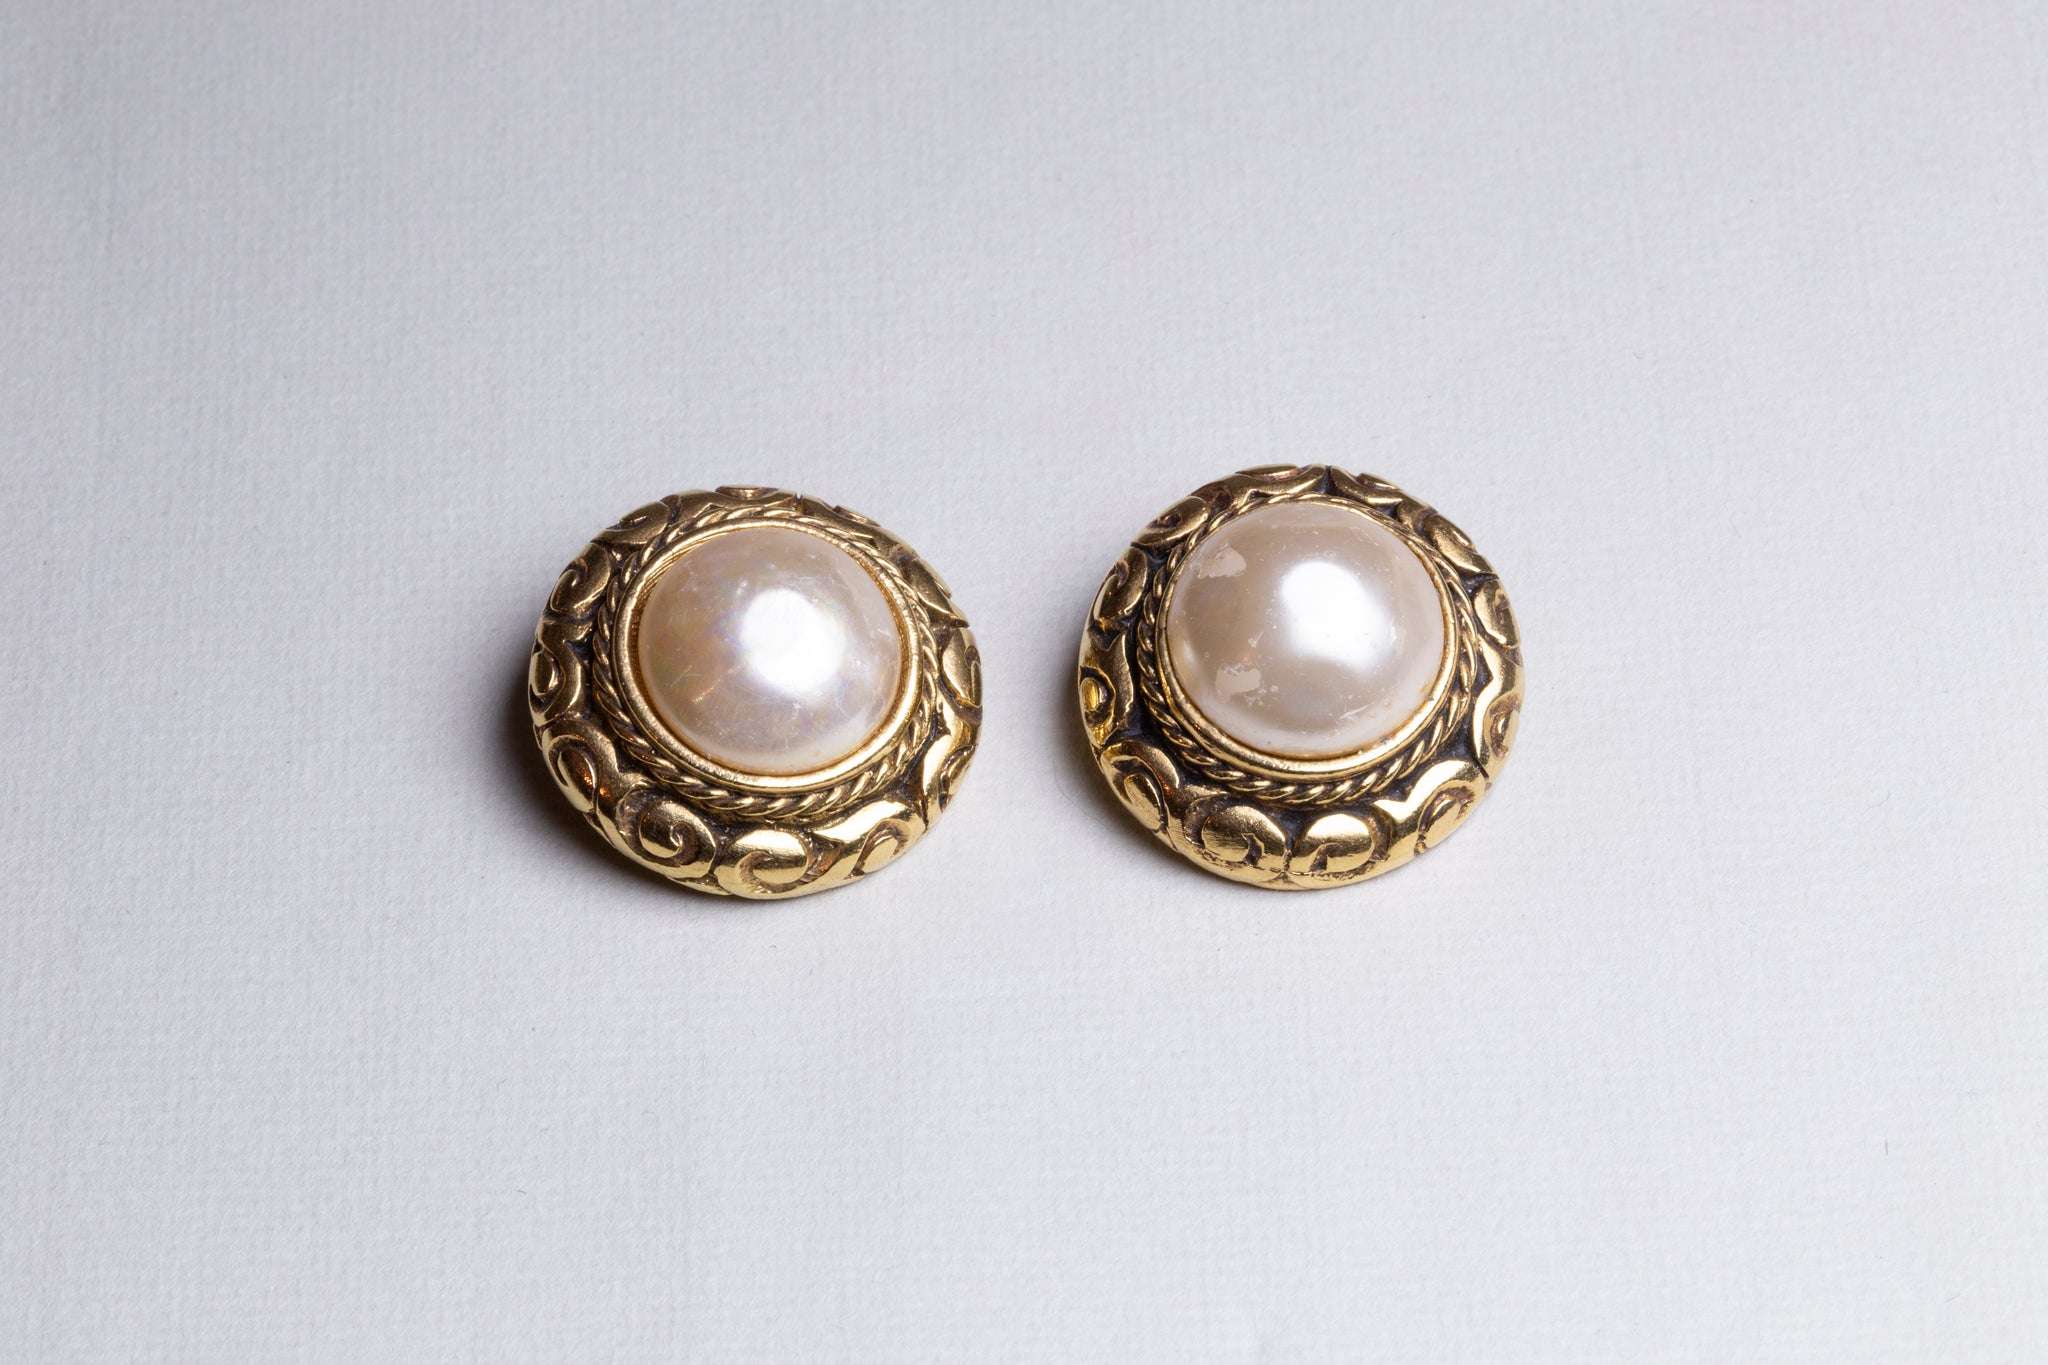 Vintage Chanel Clip-on Earrings with Pearls - felt